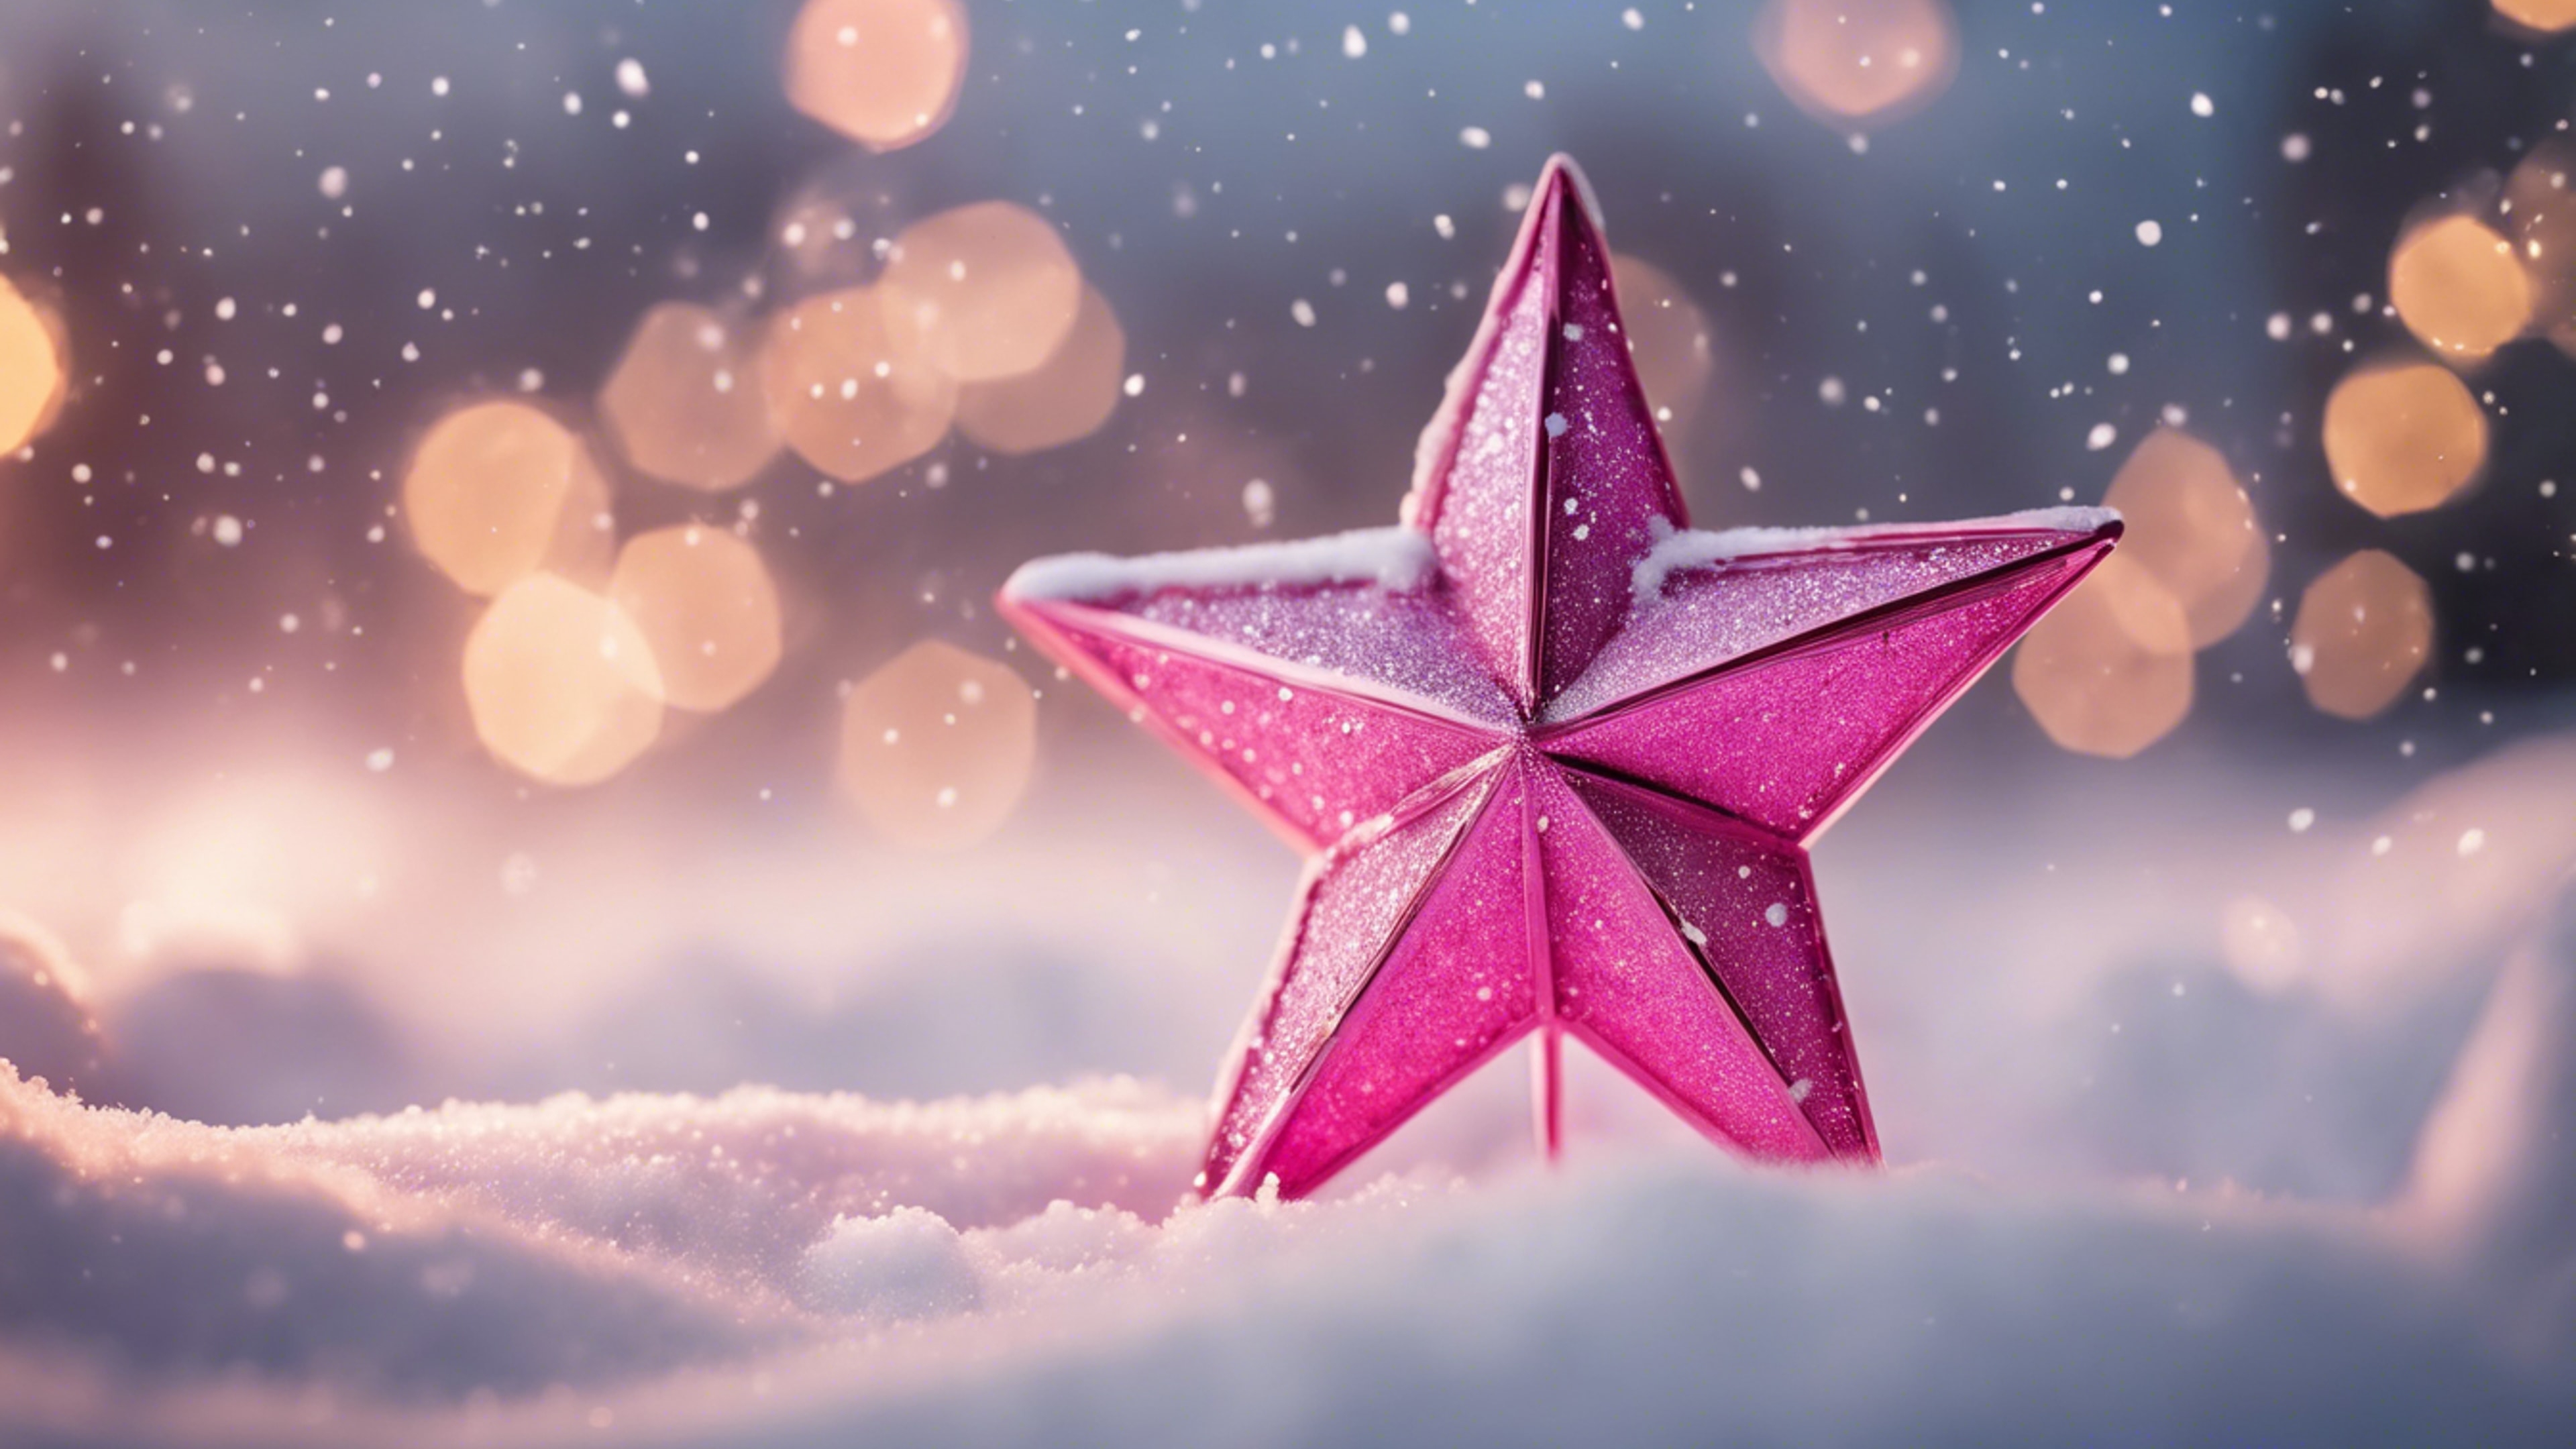 A brightly lit pink Christmas star against the backdrop of a snow-filled sky. Обои[528d0c7ac72f41809e7e]